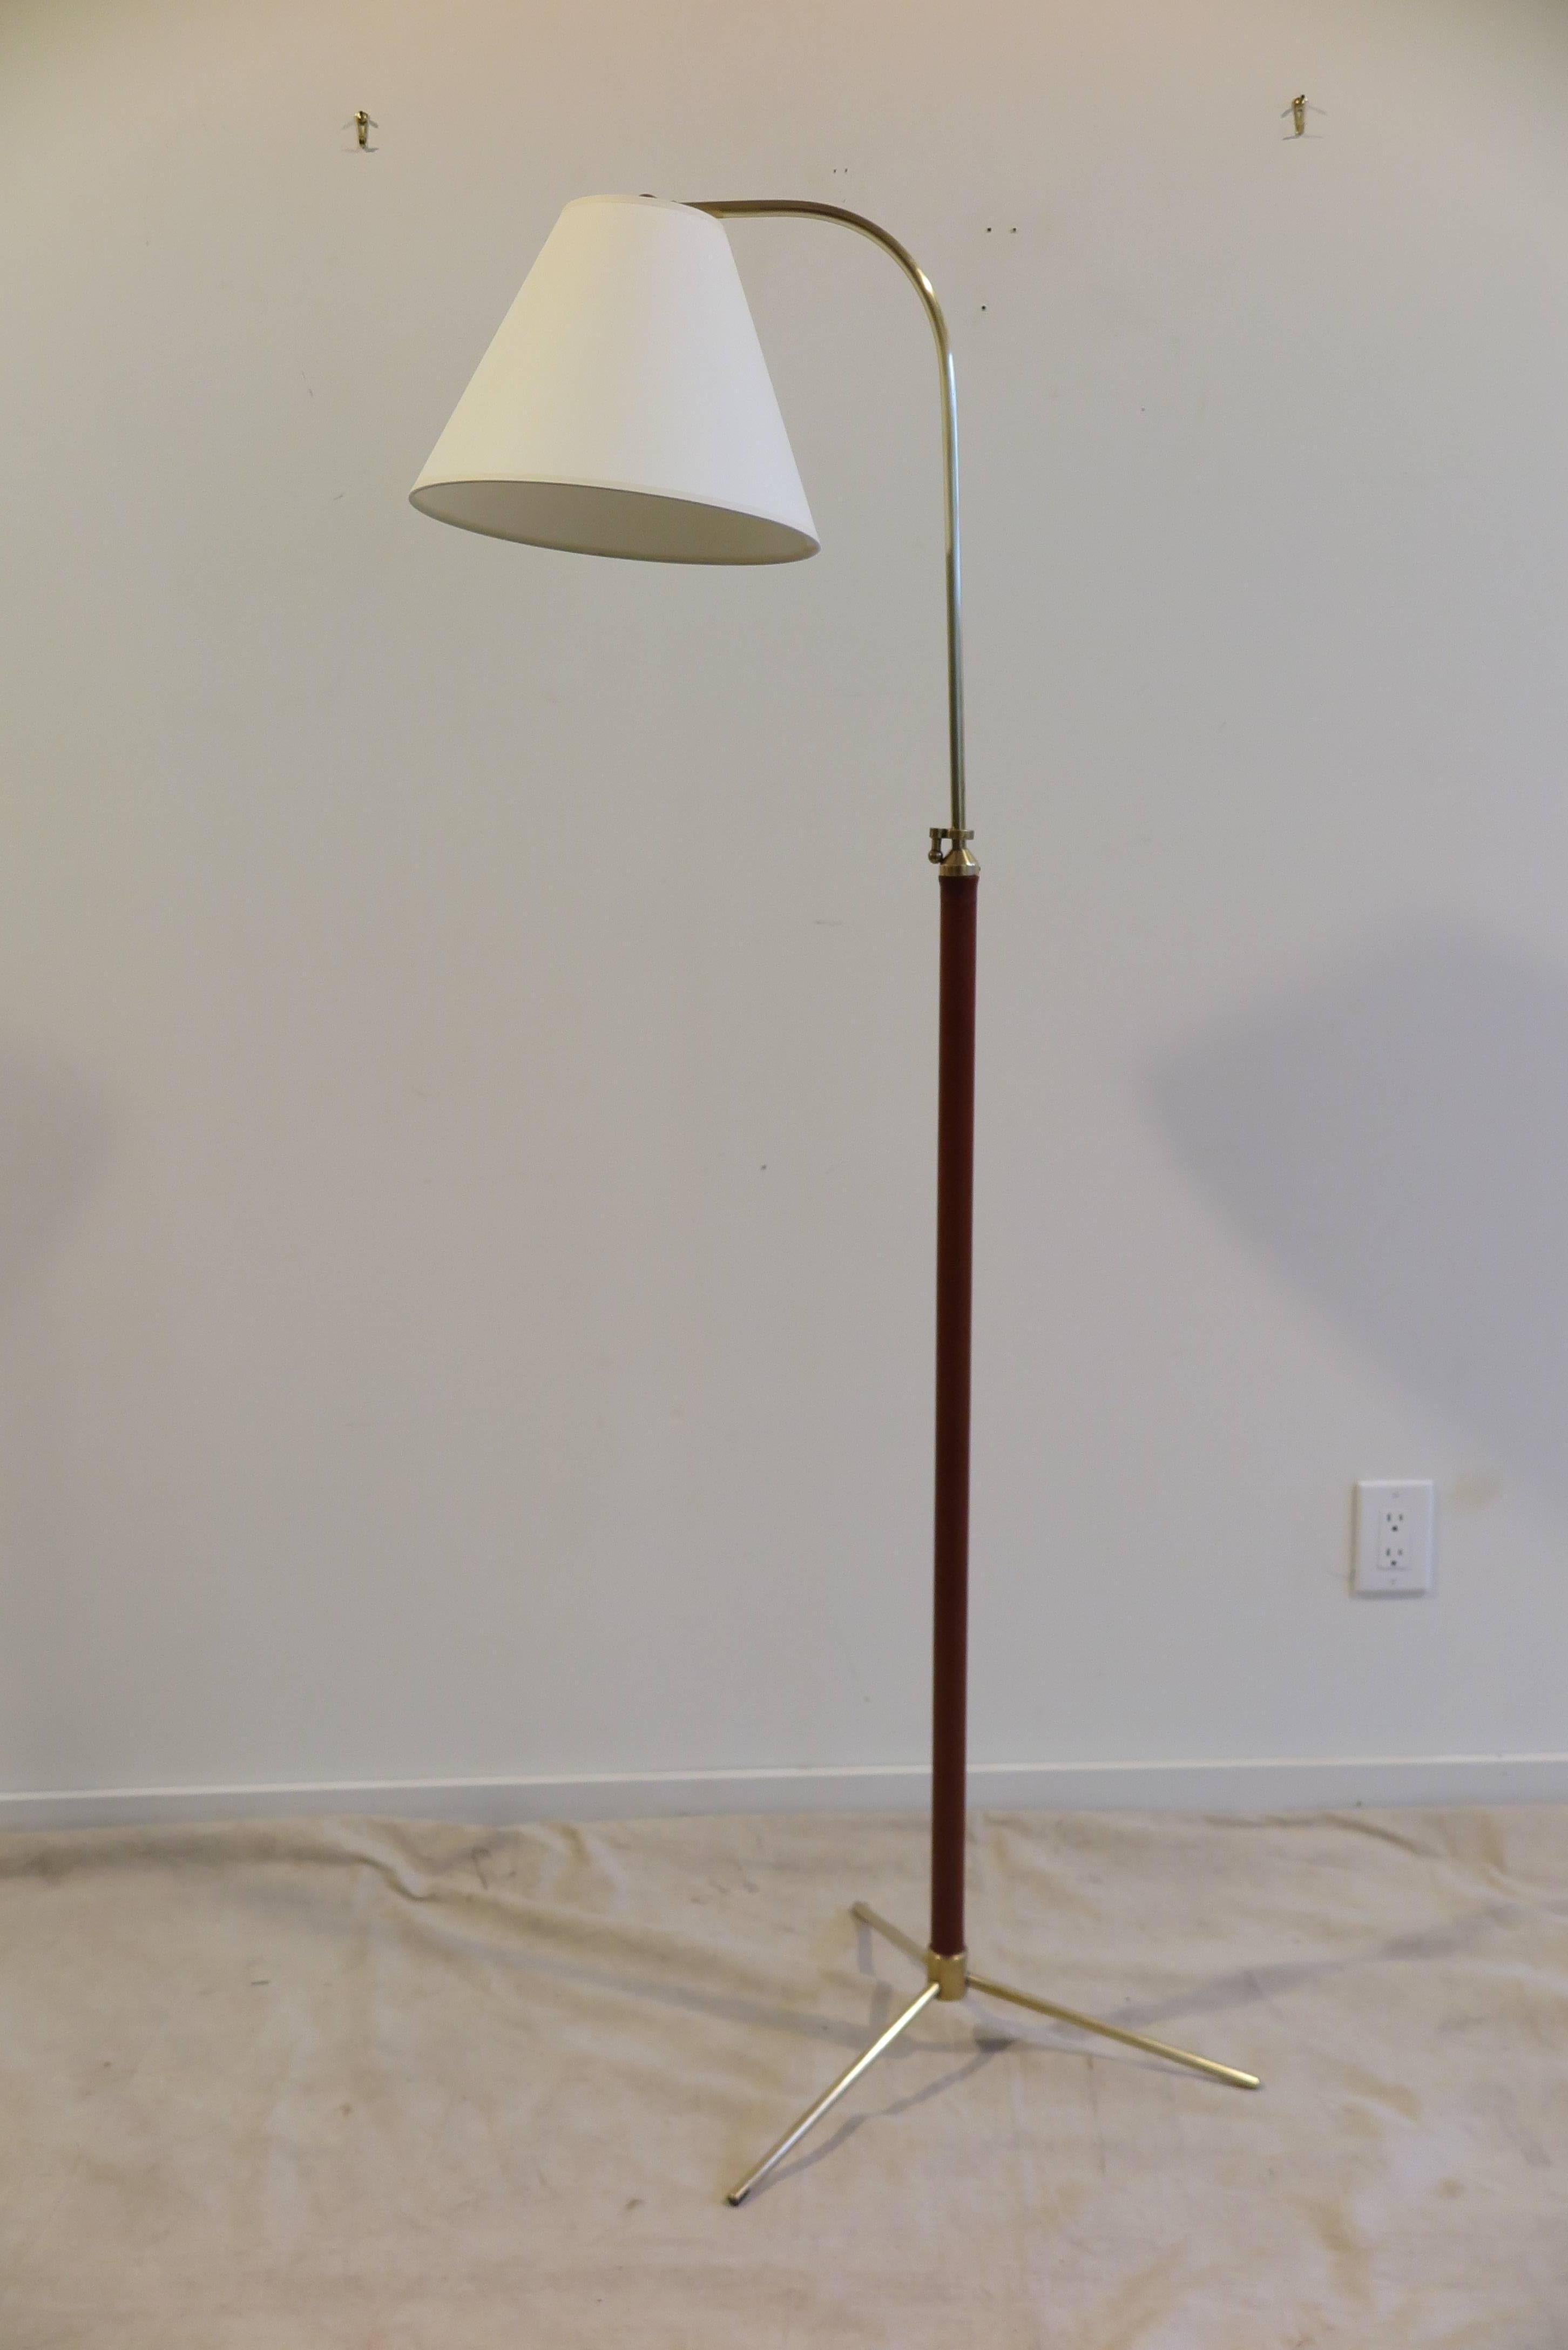 Jacques Adnet leather wrapped brass floor lamp. Adjustable height from 50 to 69 inches. Shade articulates up and down, arm will swivel the shade 360. Solid brass socket with dimmer switch. Brown Leather color. Condition is excellent.